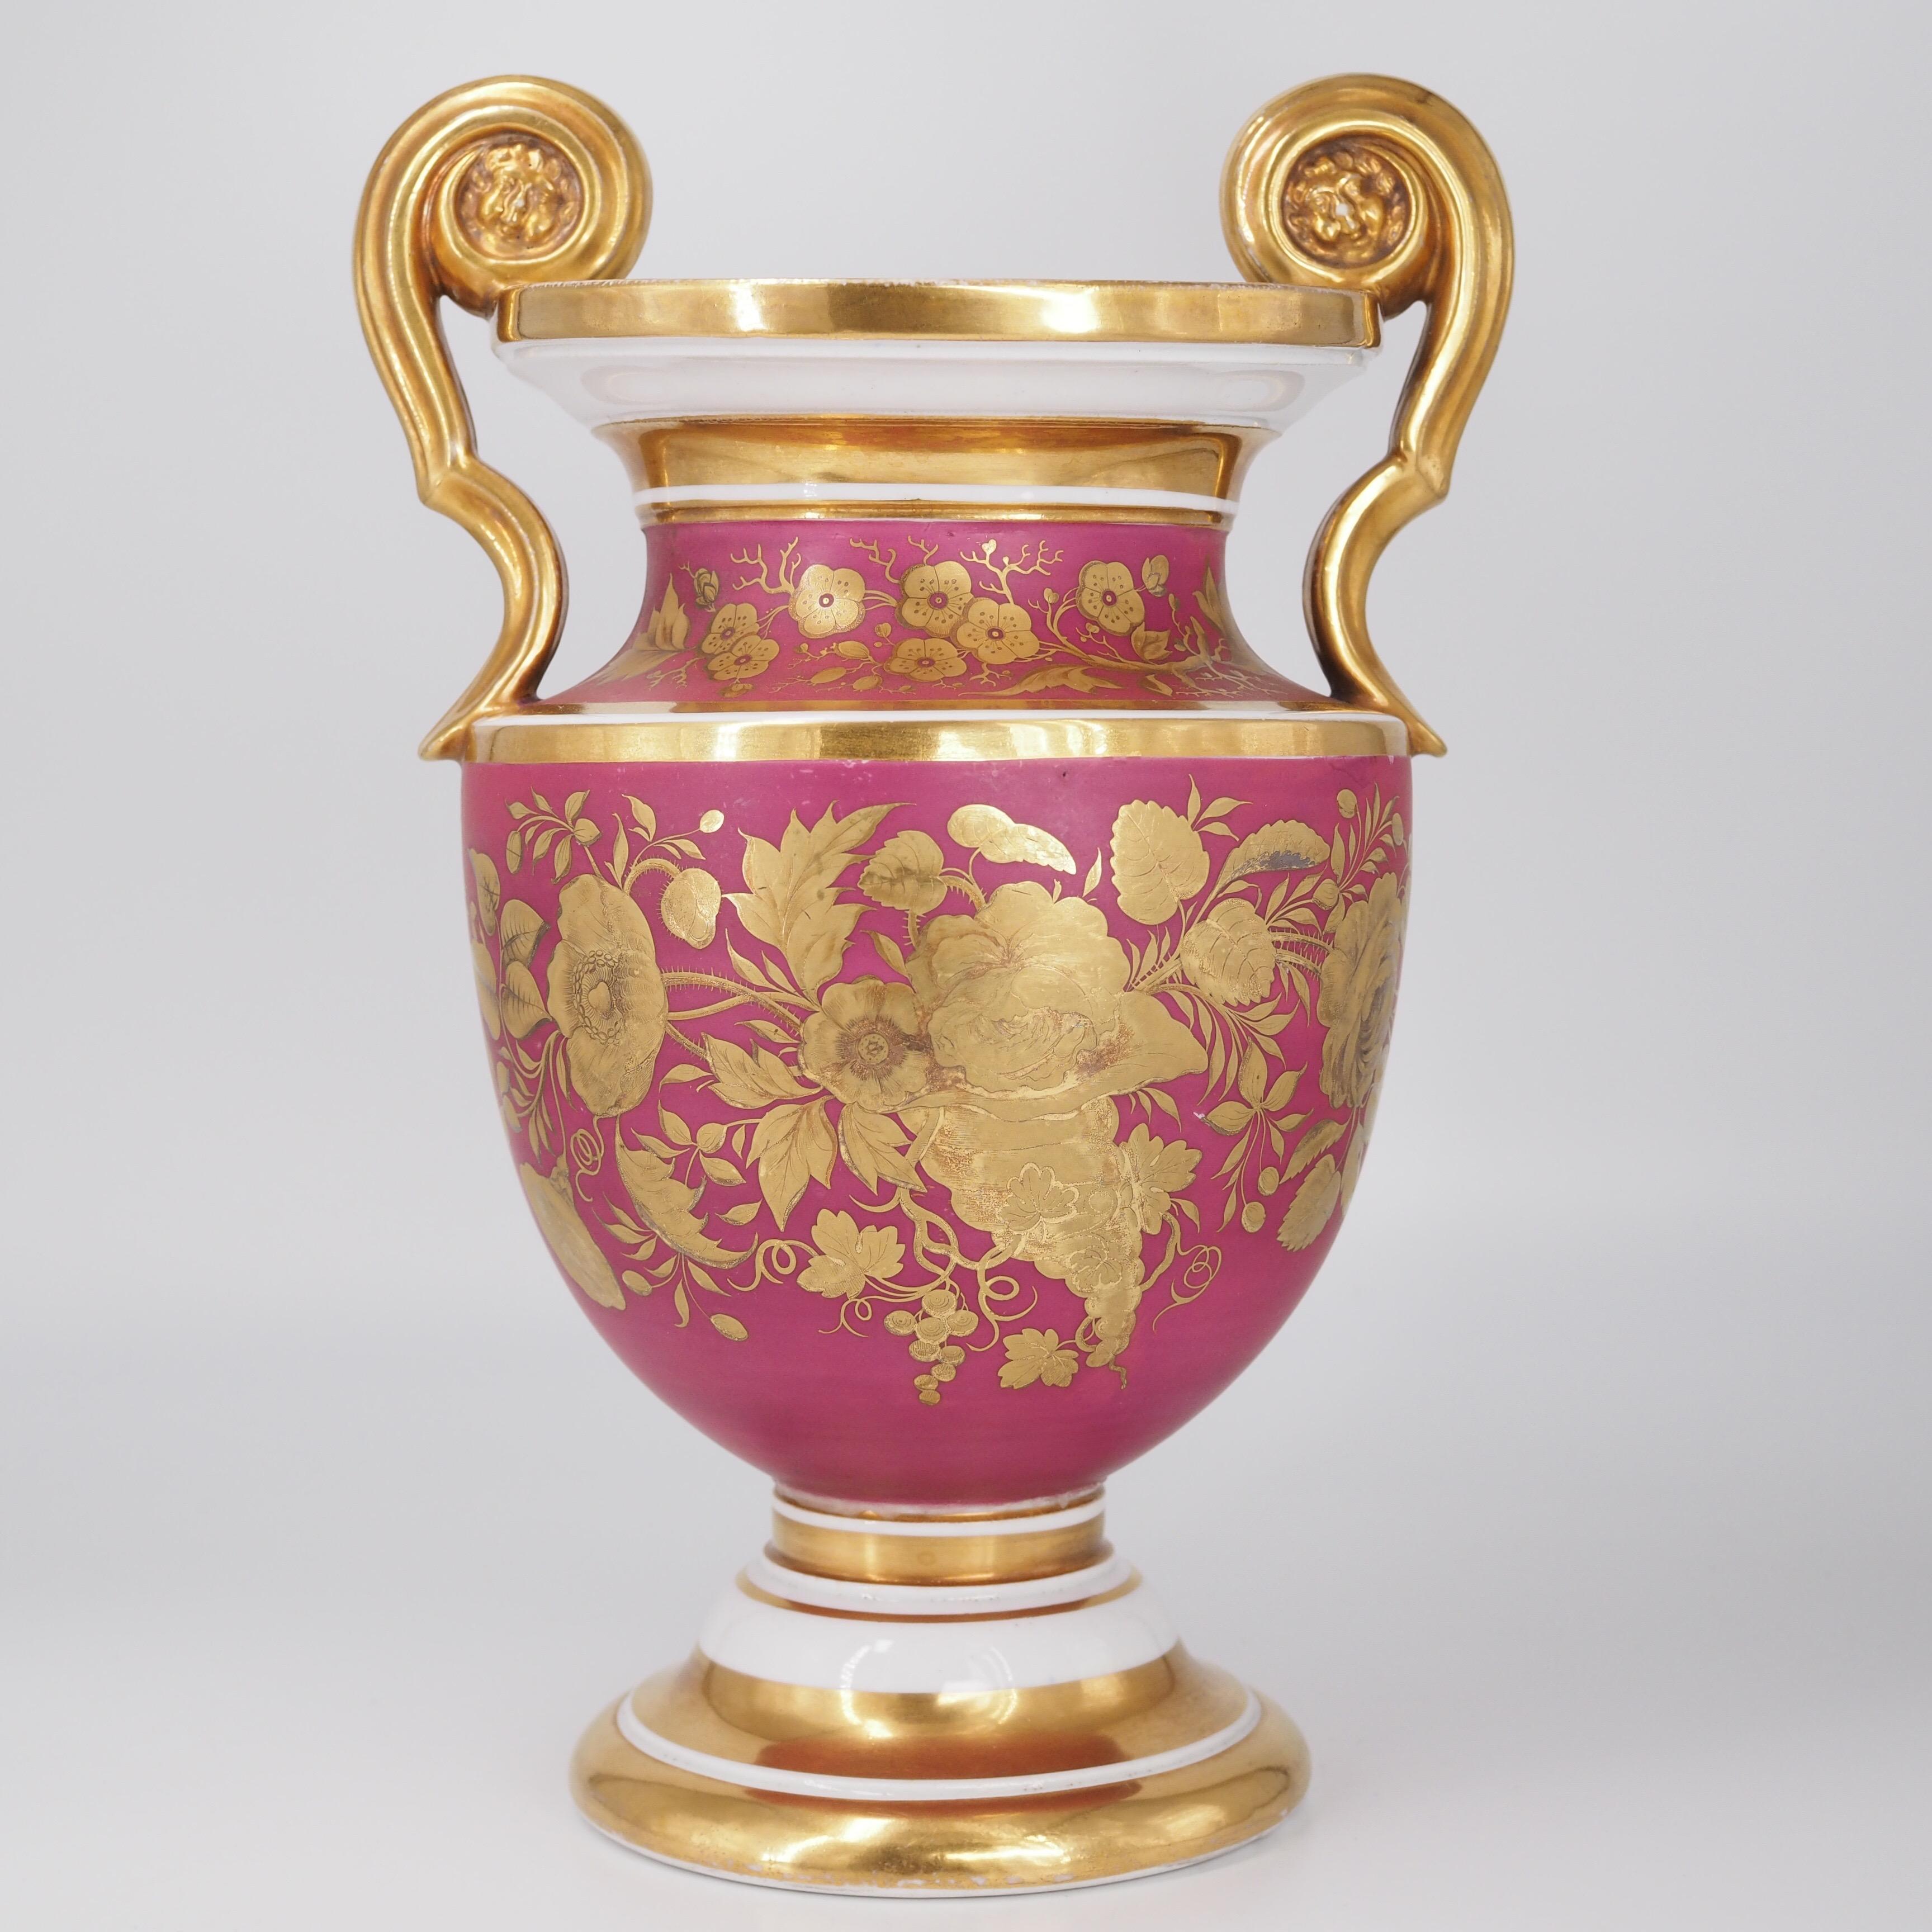 English bone china urn, the form taken from a Greek neck-amphora, the gilt handle terminals with scrolls framing a face, the front with a panel of flowers reserved on a puce ground, the reverse with superb tooled gold flower spray with tooling.